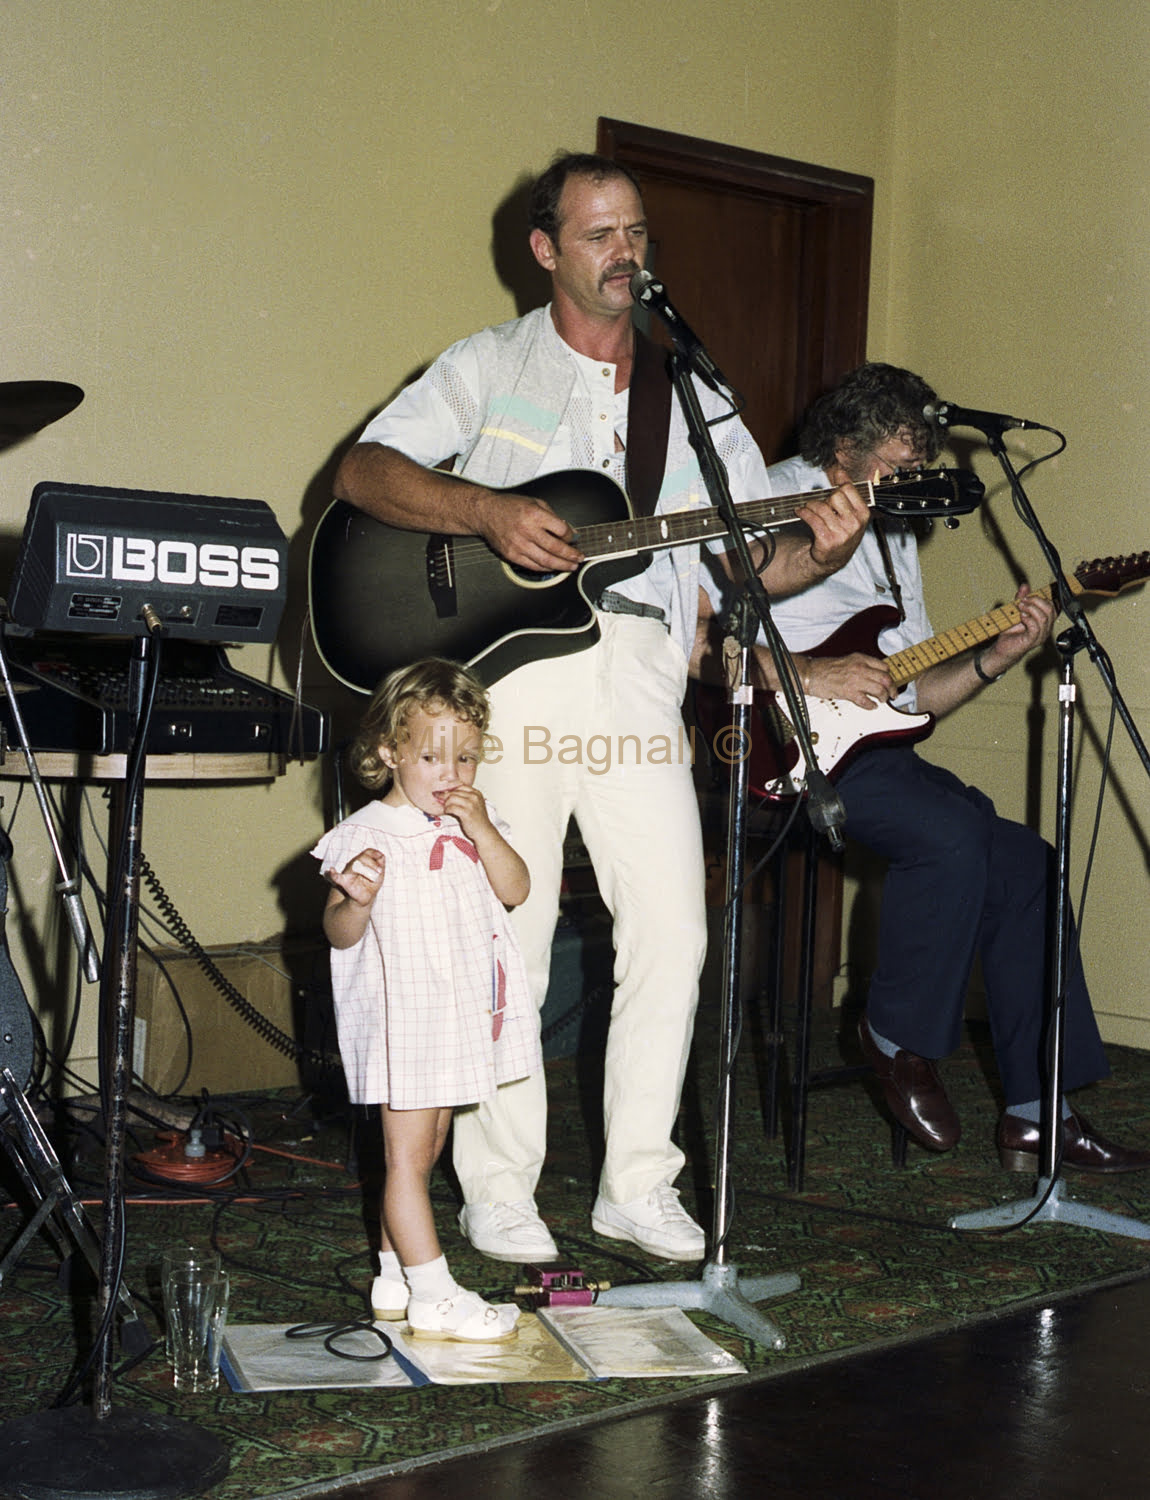 04_Bugsy_Henson Park Hotel_10- Bugsy Merry, & Daughter on Stage,